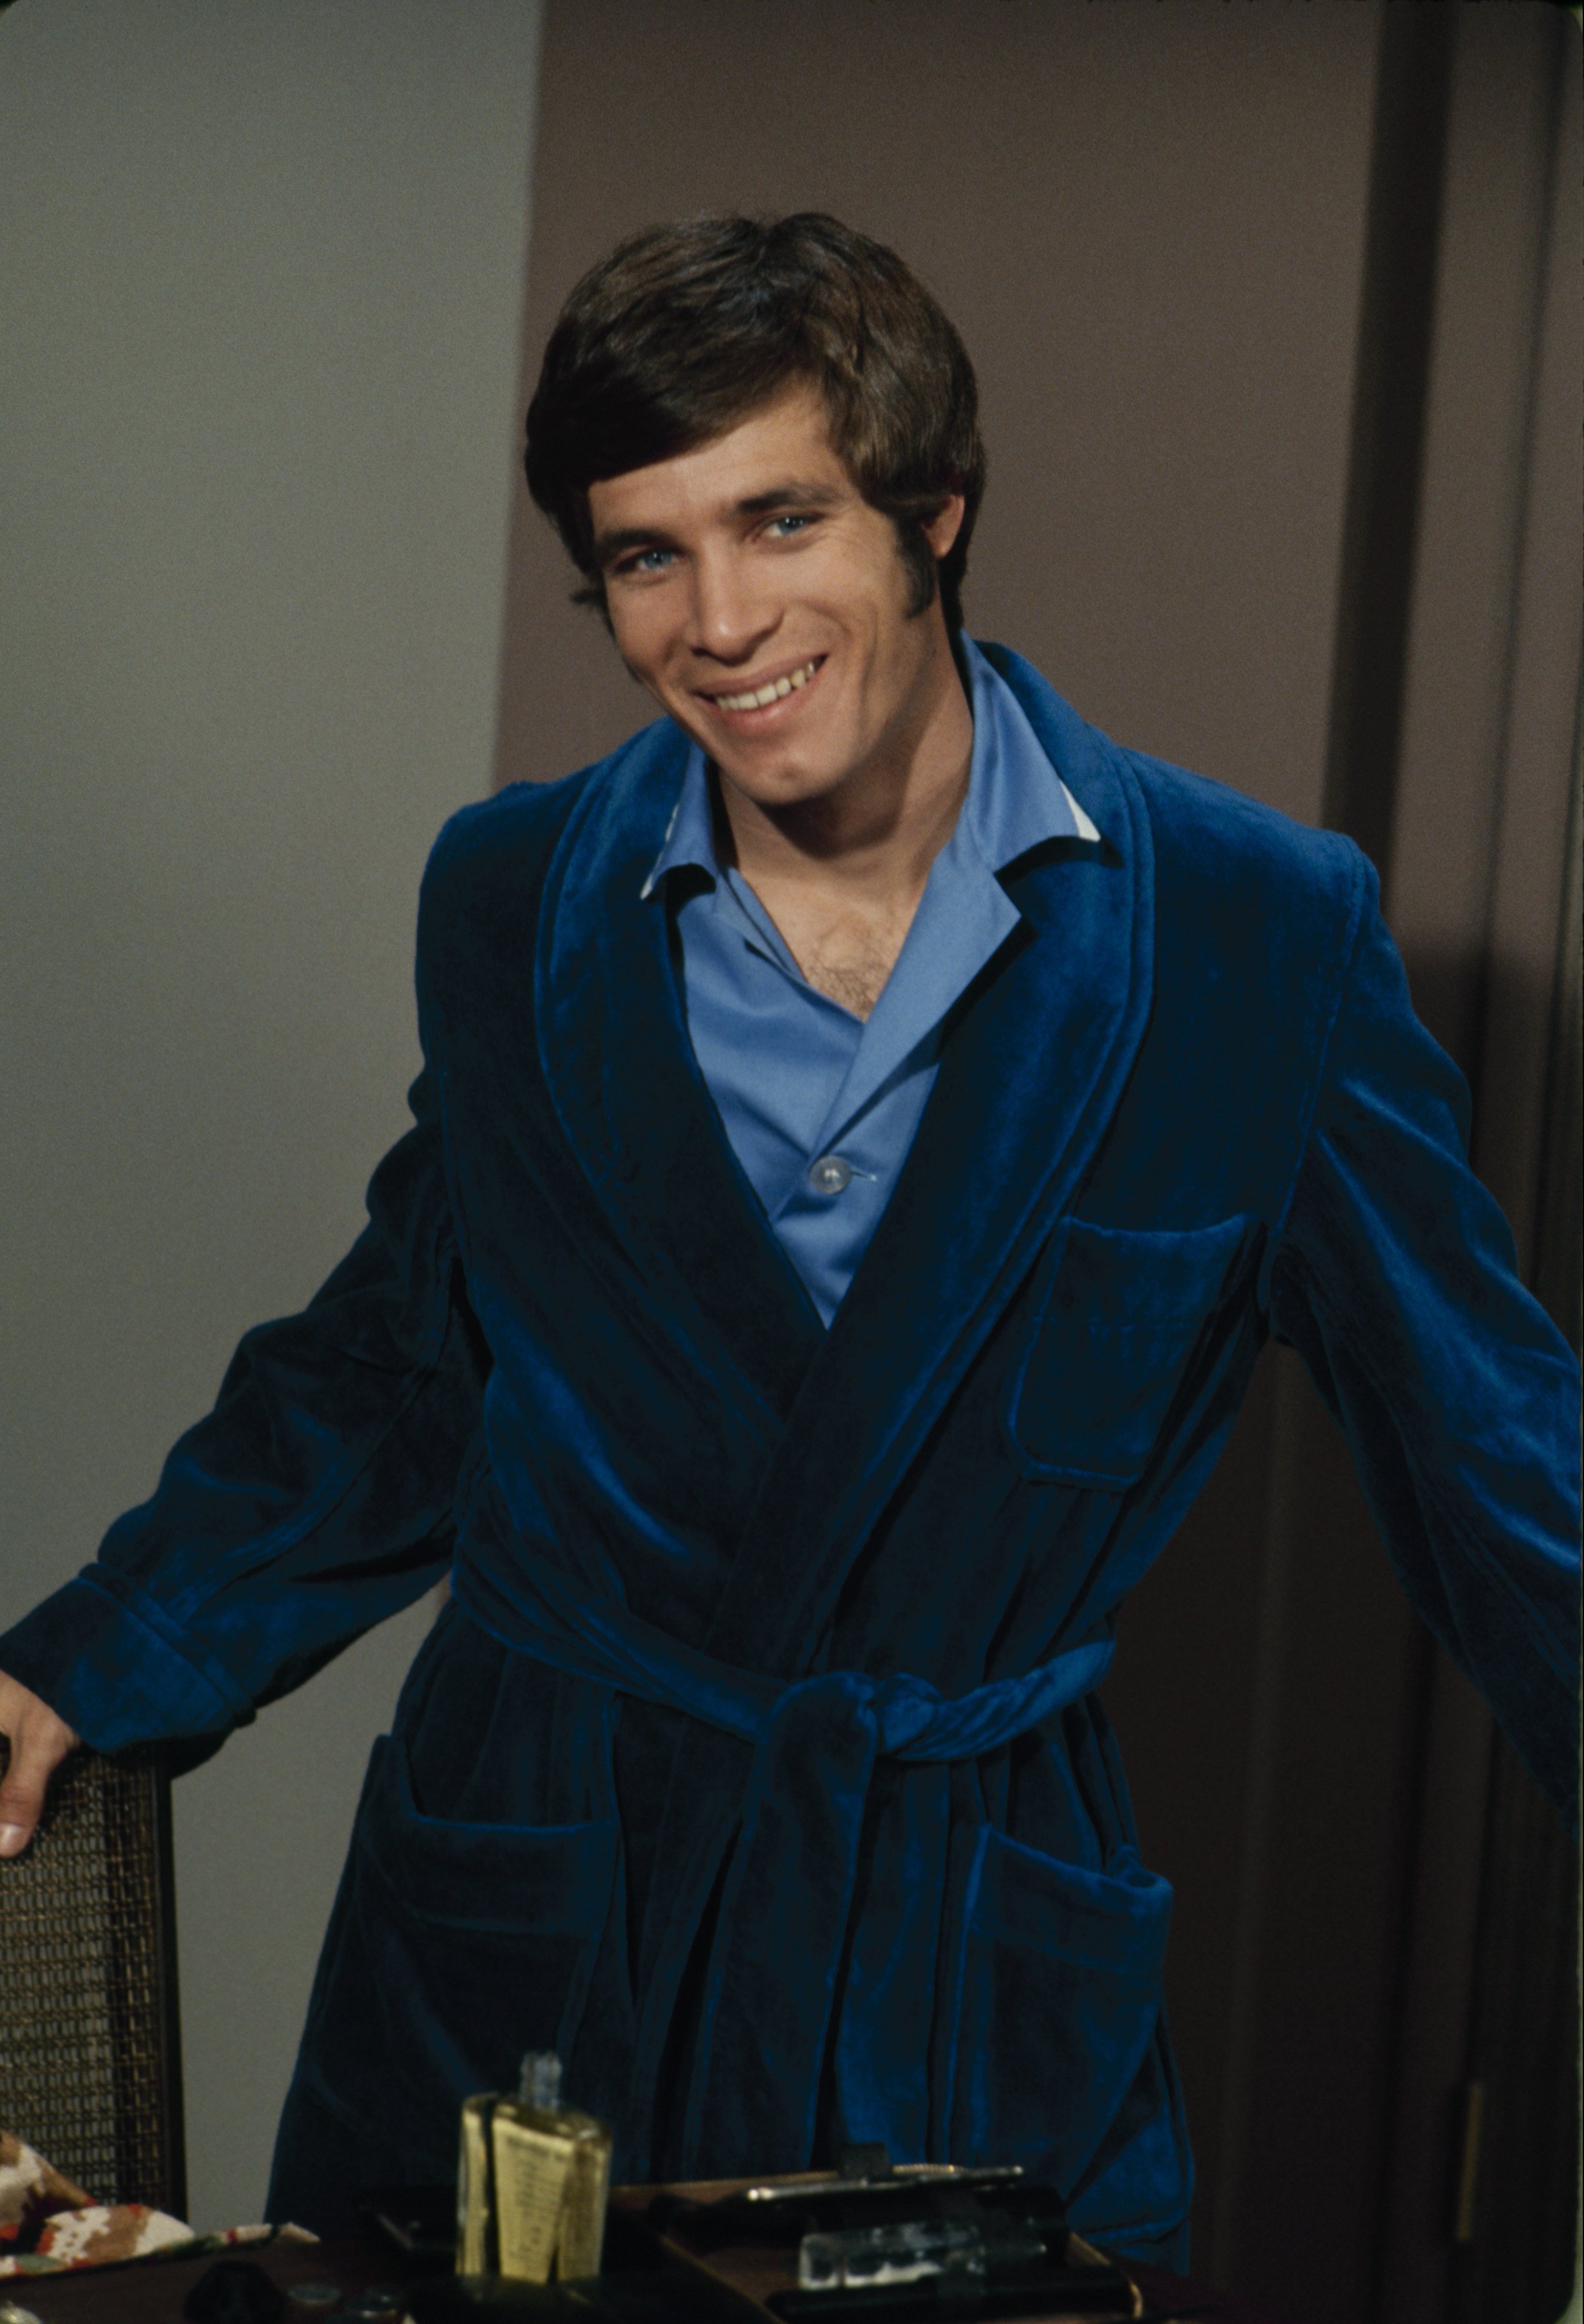 Don Grady poses for the comedy series "Love, American Style" on February 13, 1970. | Photo: Getty Images